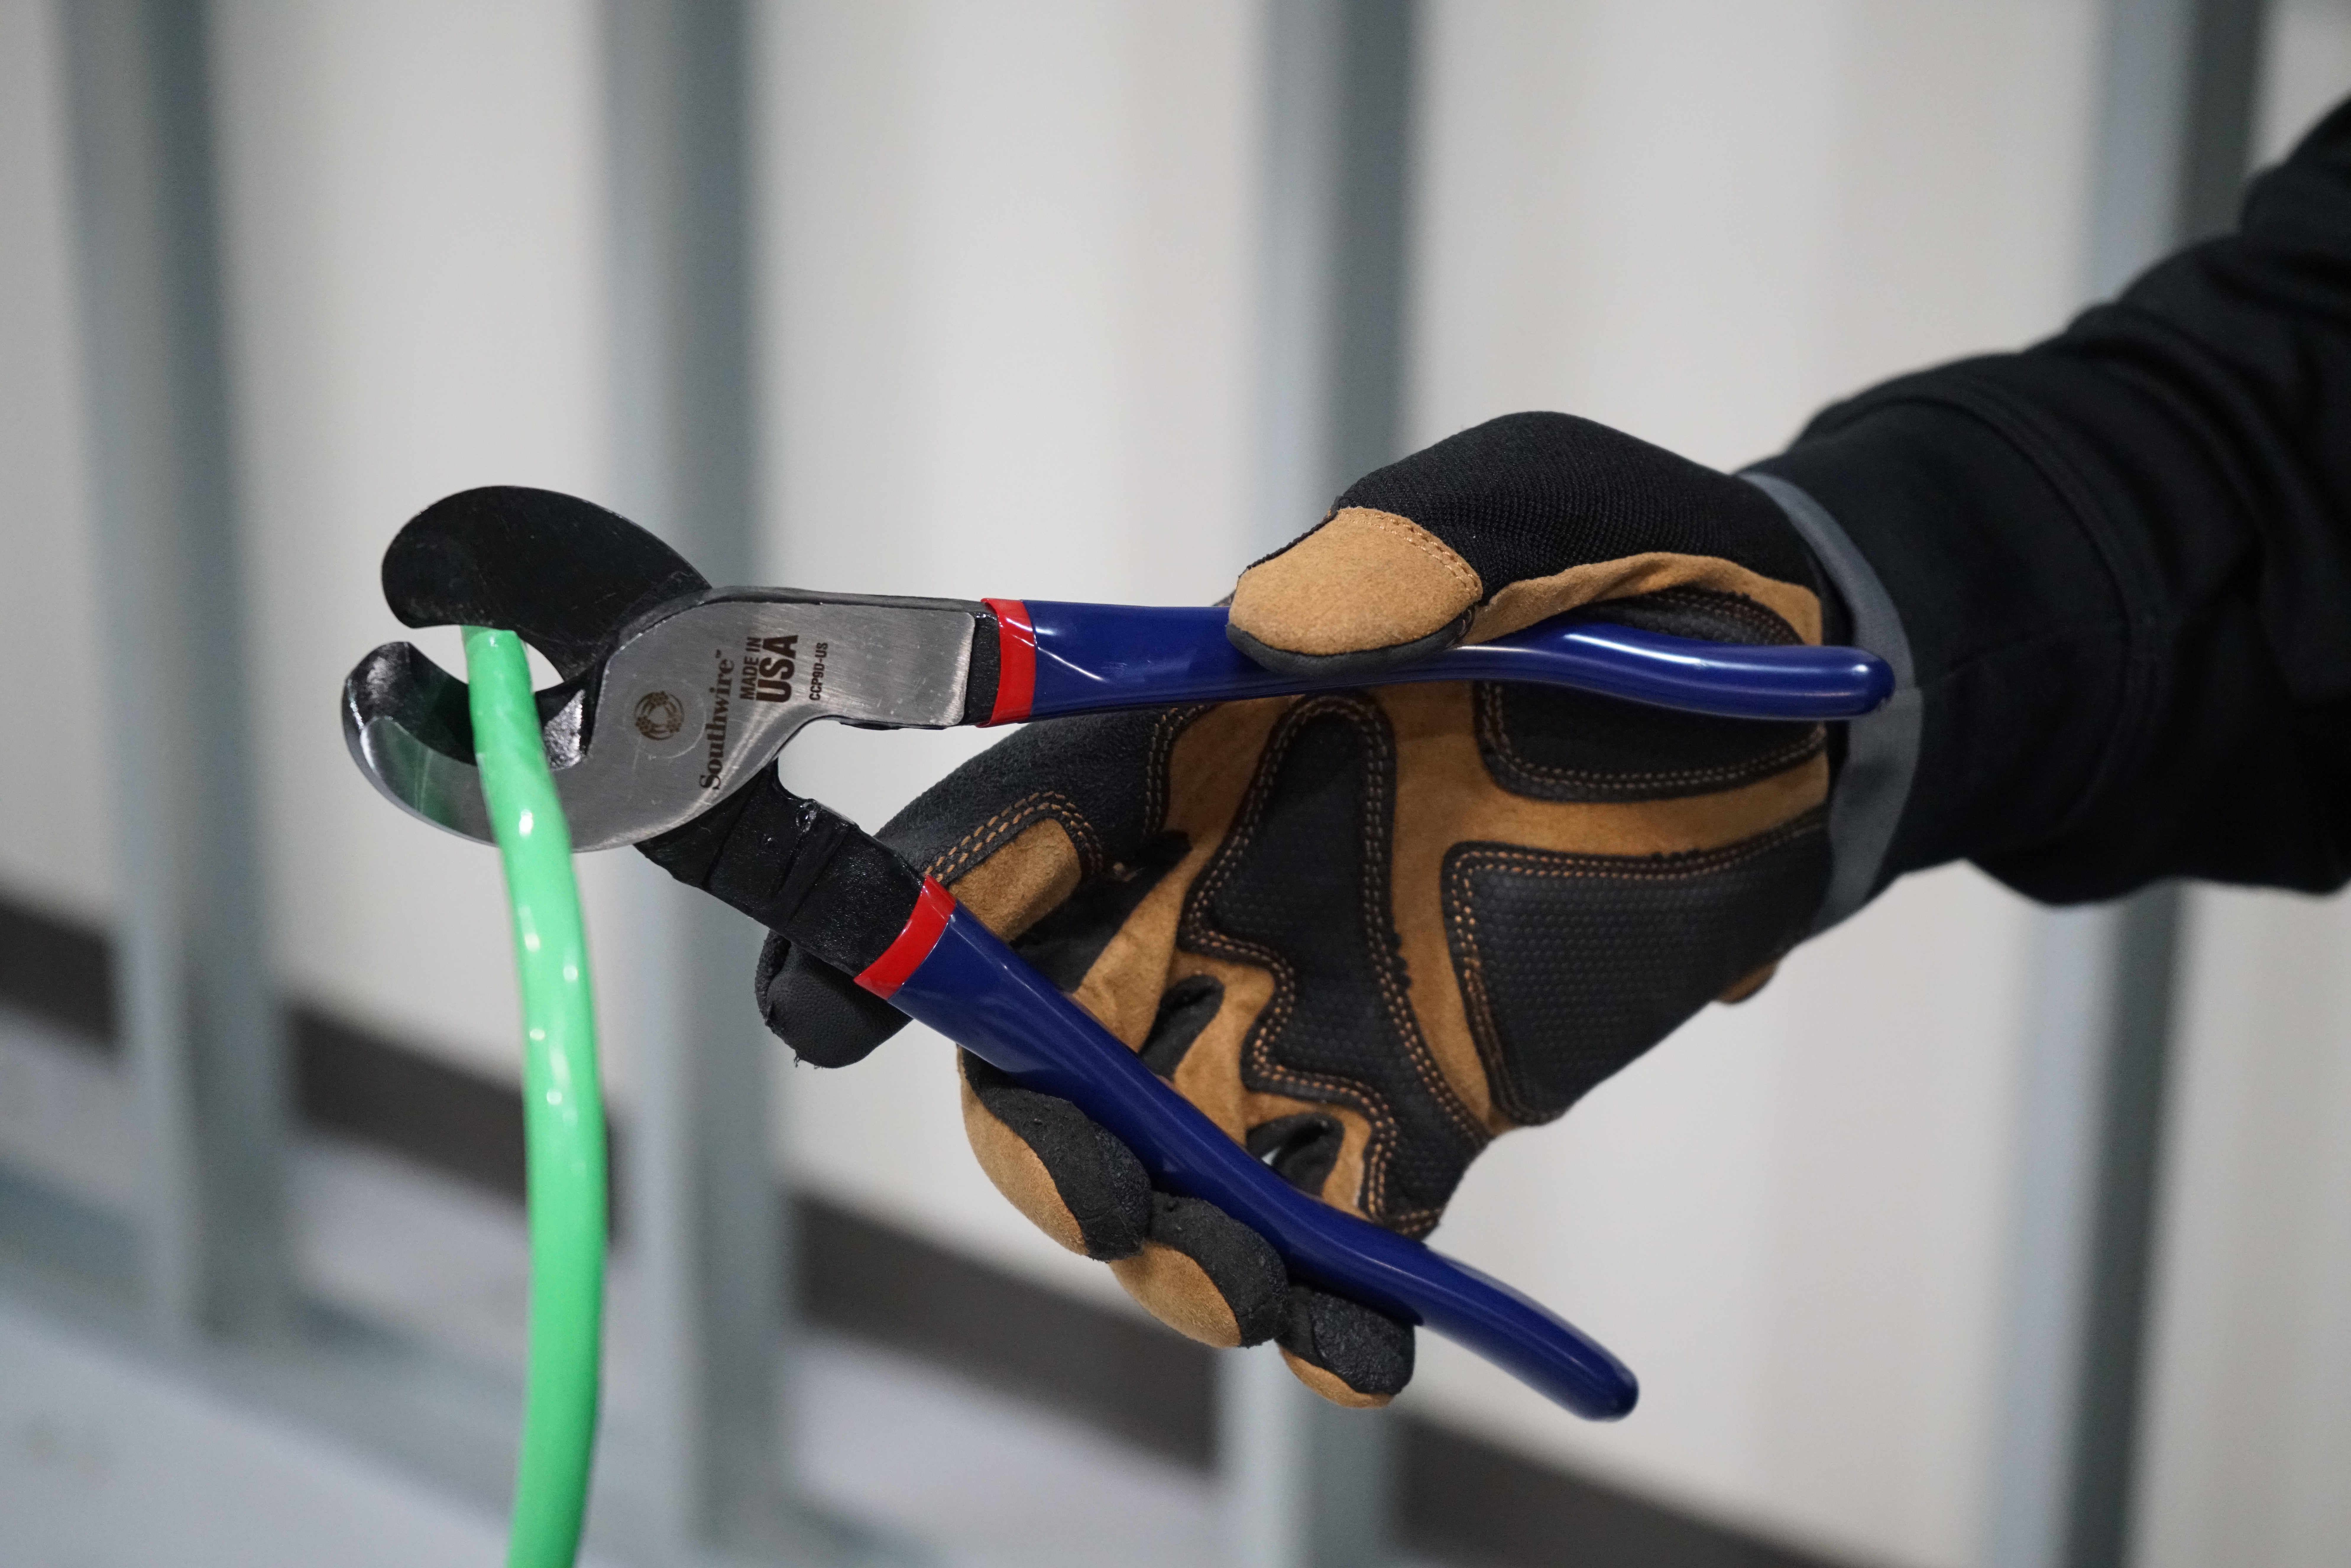 Made from American forged steel. Built to withstand jobsite wear and tear. These pliers have induction hardened blades for maximum durability and cut up to 4/0 AWG aluminum, 2/0 AWG copper, and 100-pair 24 AWG communications cable. Our tradesmen and women meet every job with heart and pride. Their tools should, too.